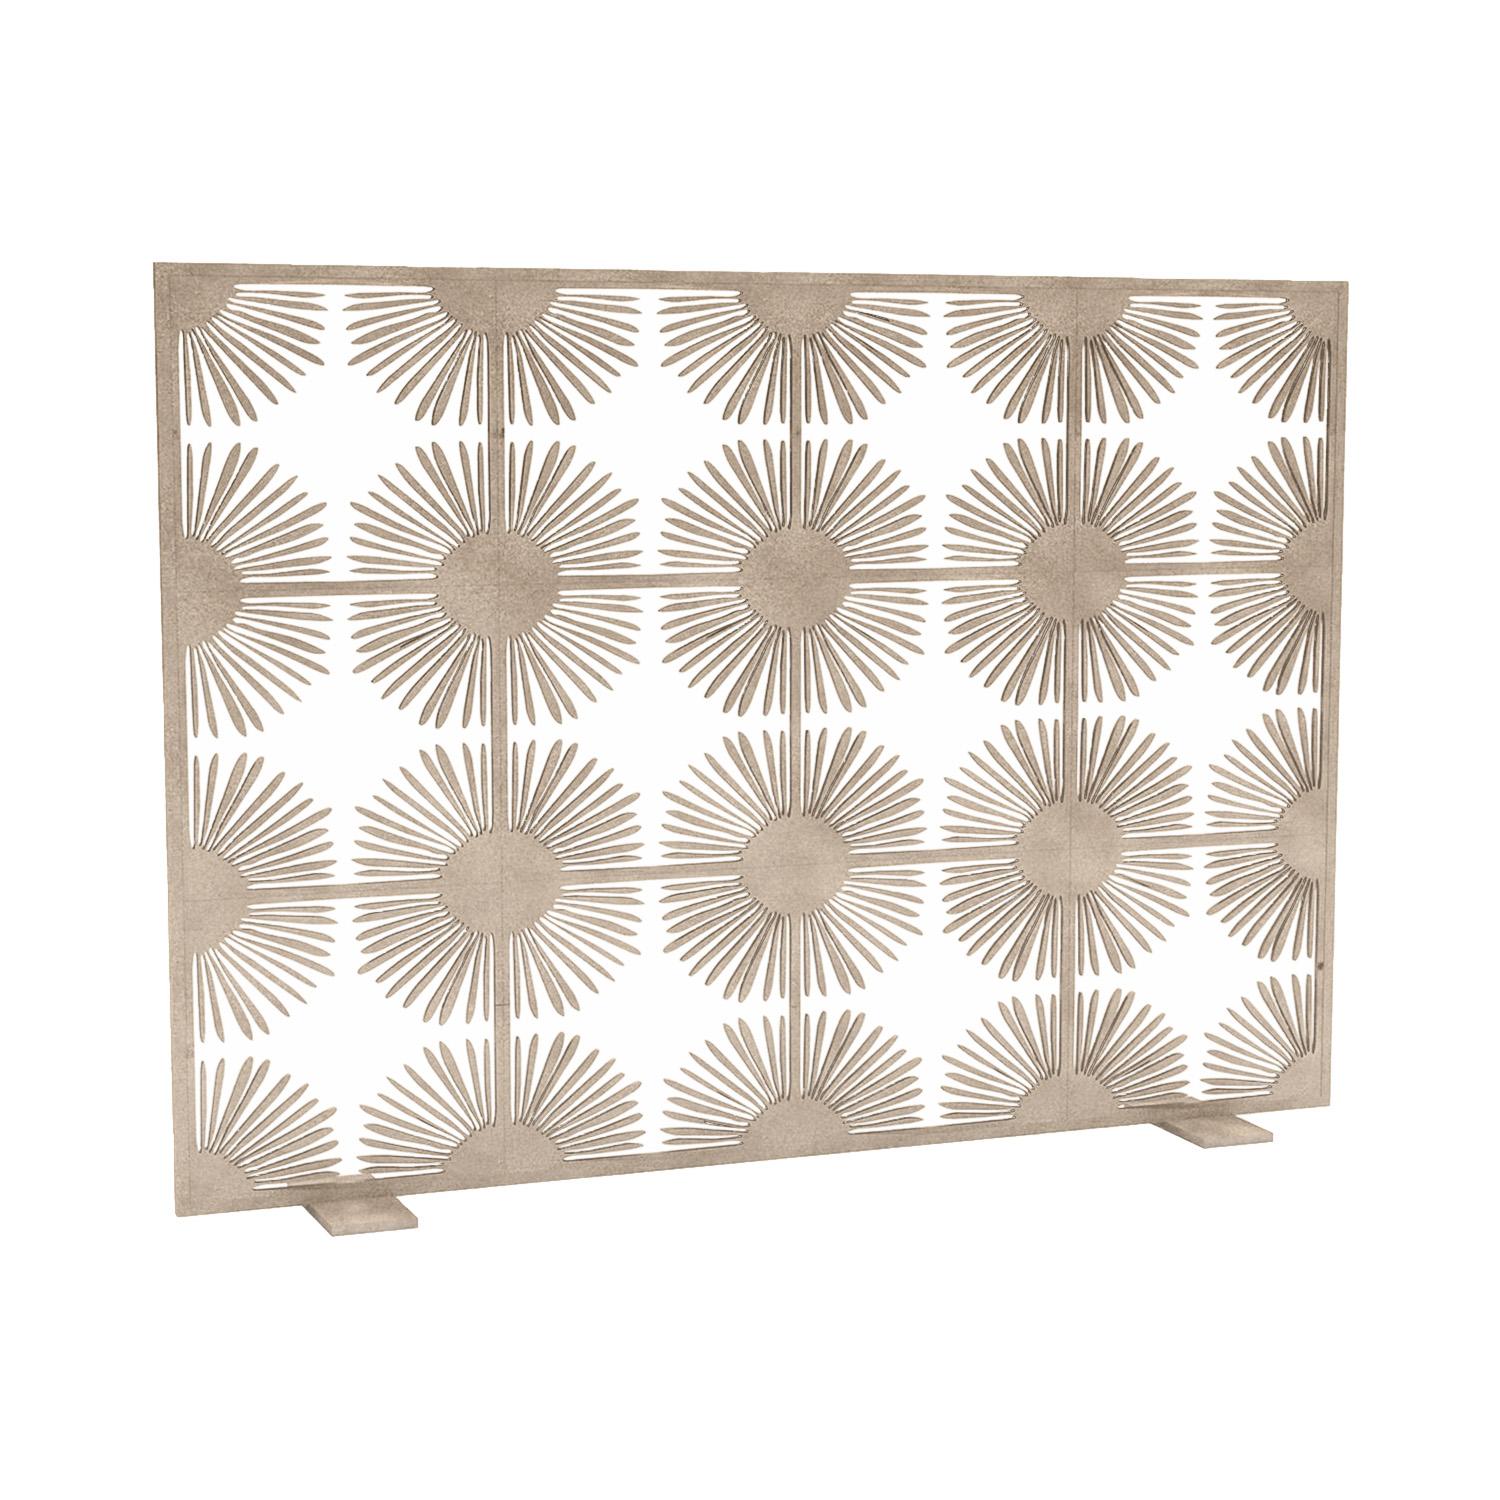 Halo Fireplace Screen in Aged Silver For Sale